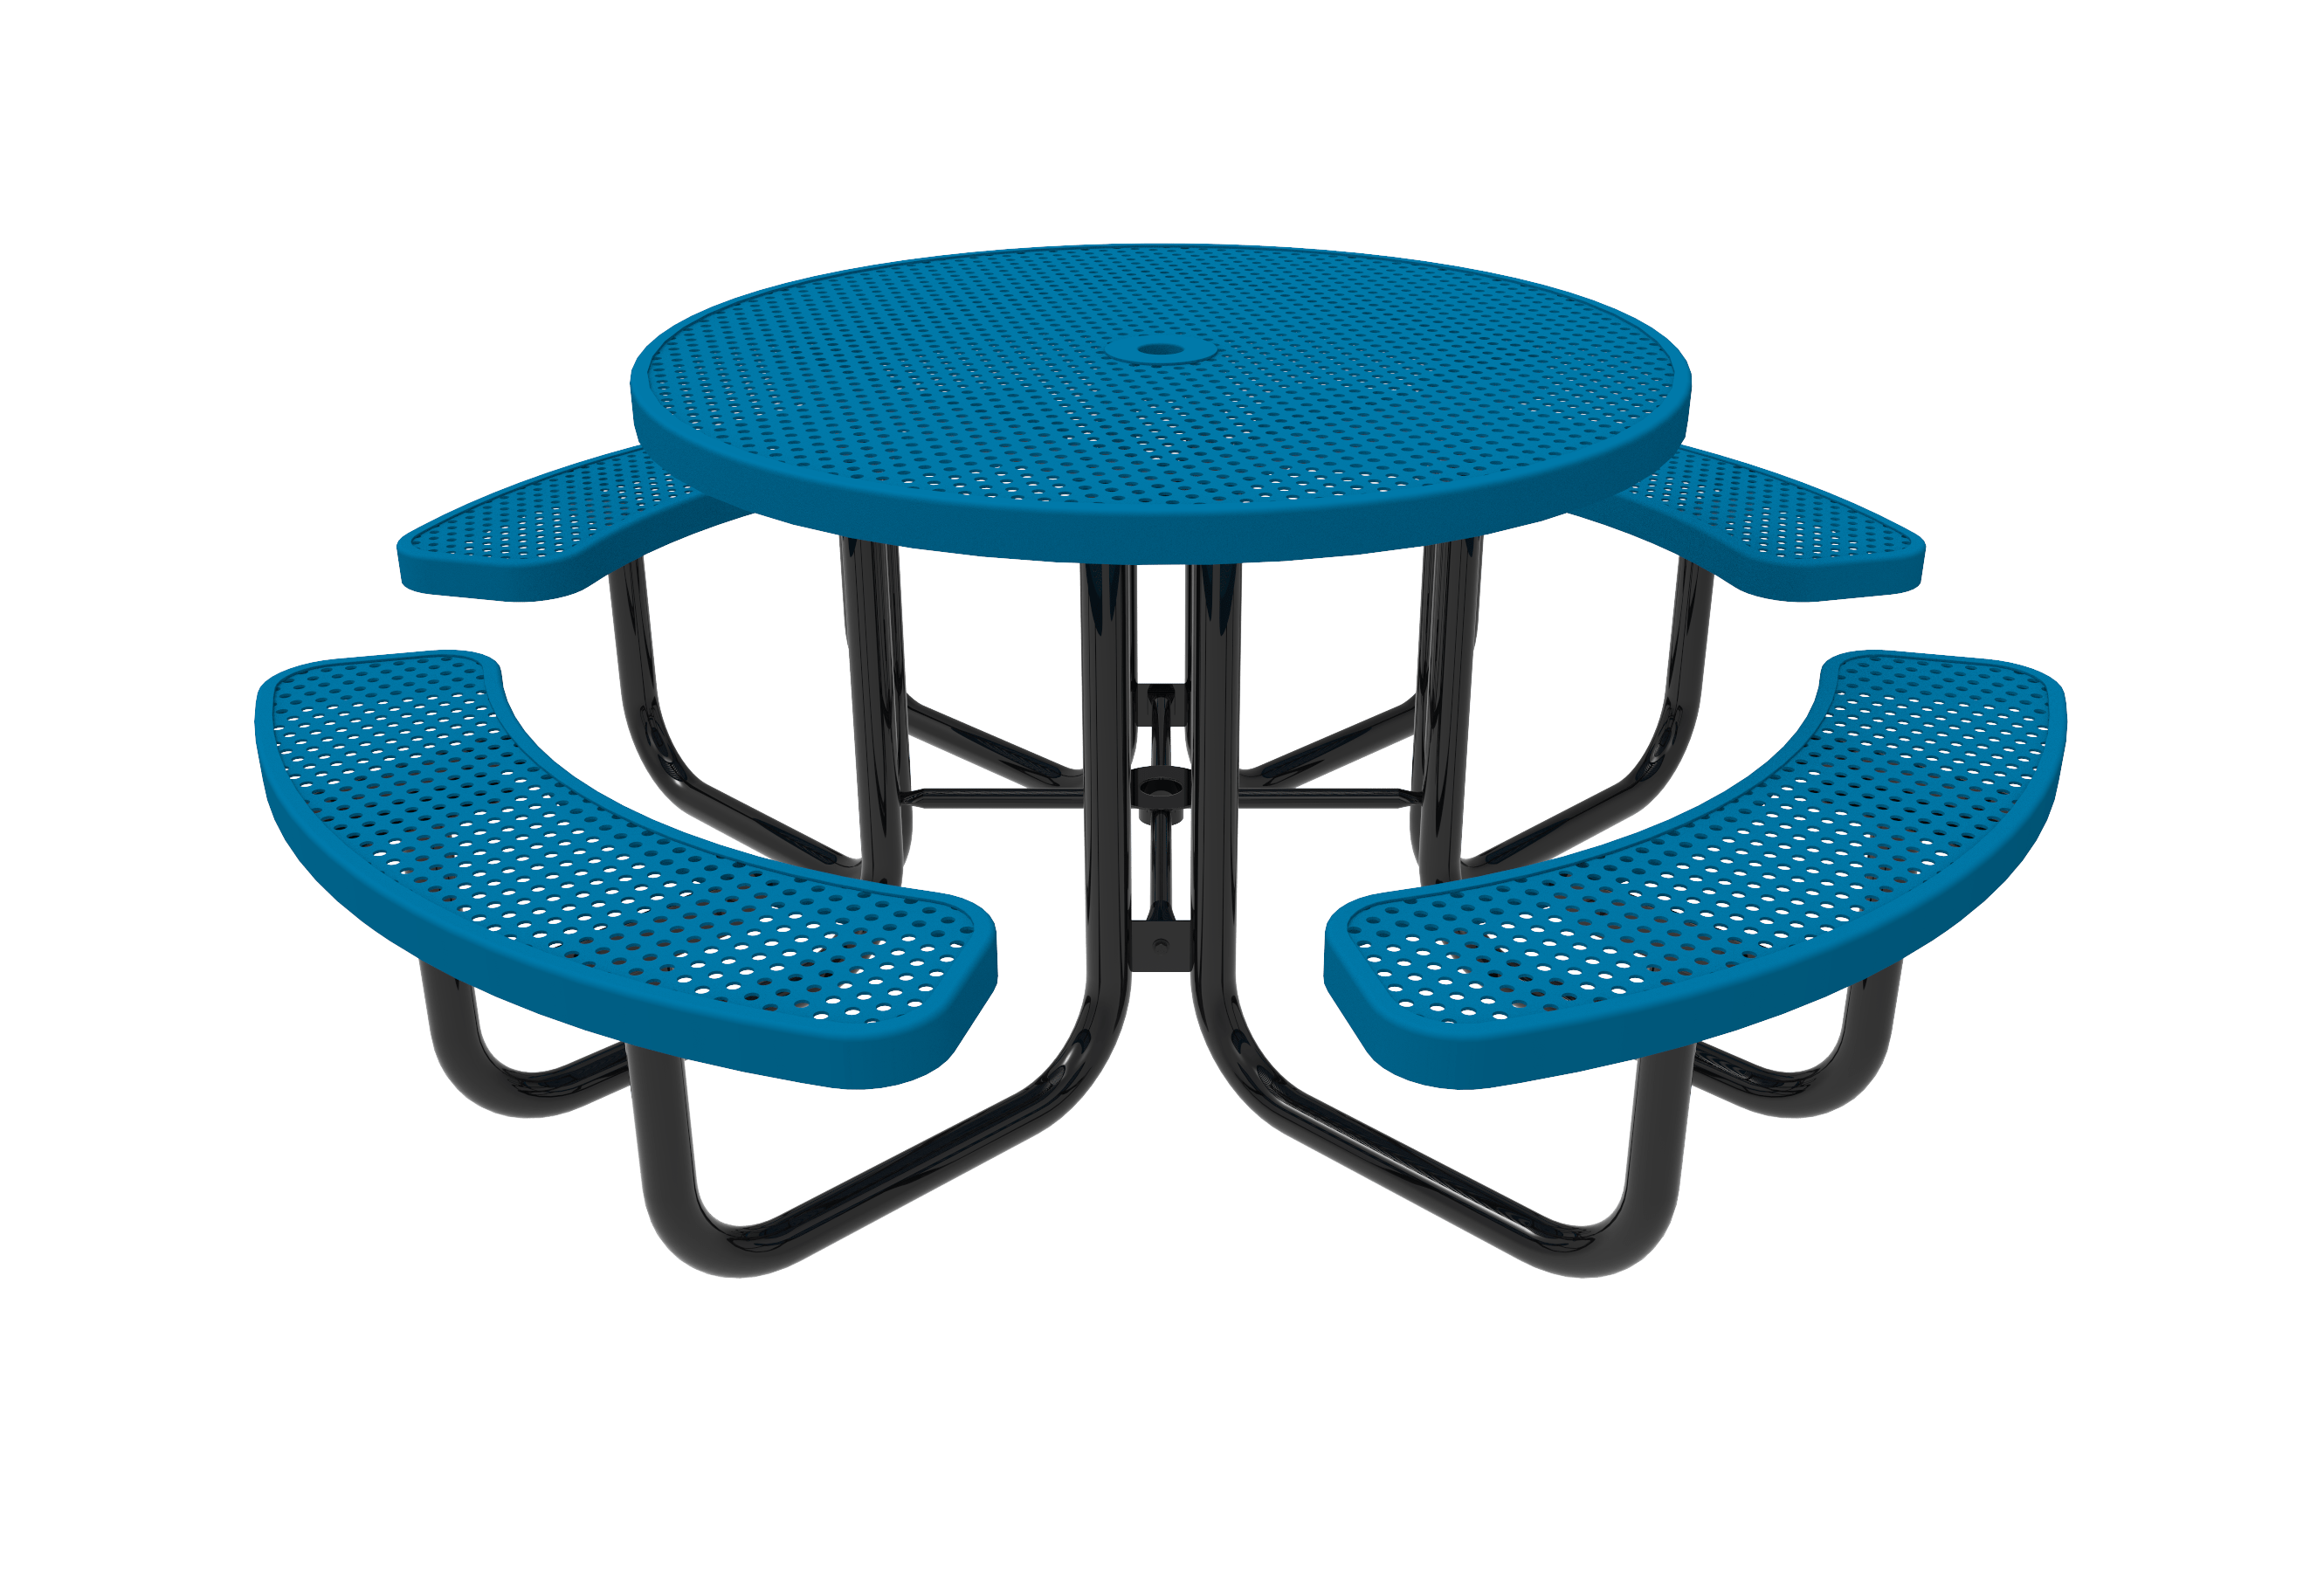 46″ Round Picnic Table 4 Seat-Punched
TRD46-D-04-000
Industry Standard Finis
$1189.00
TRD46-B-04-000
Advantage Premium Finish
$1679.00
